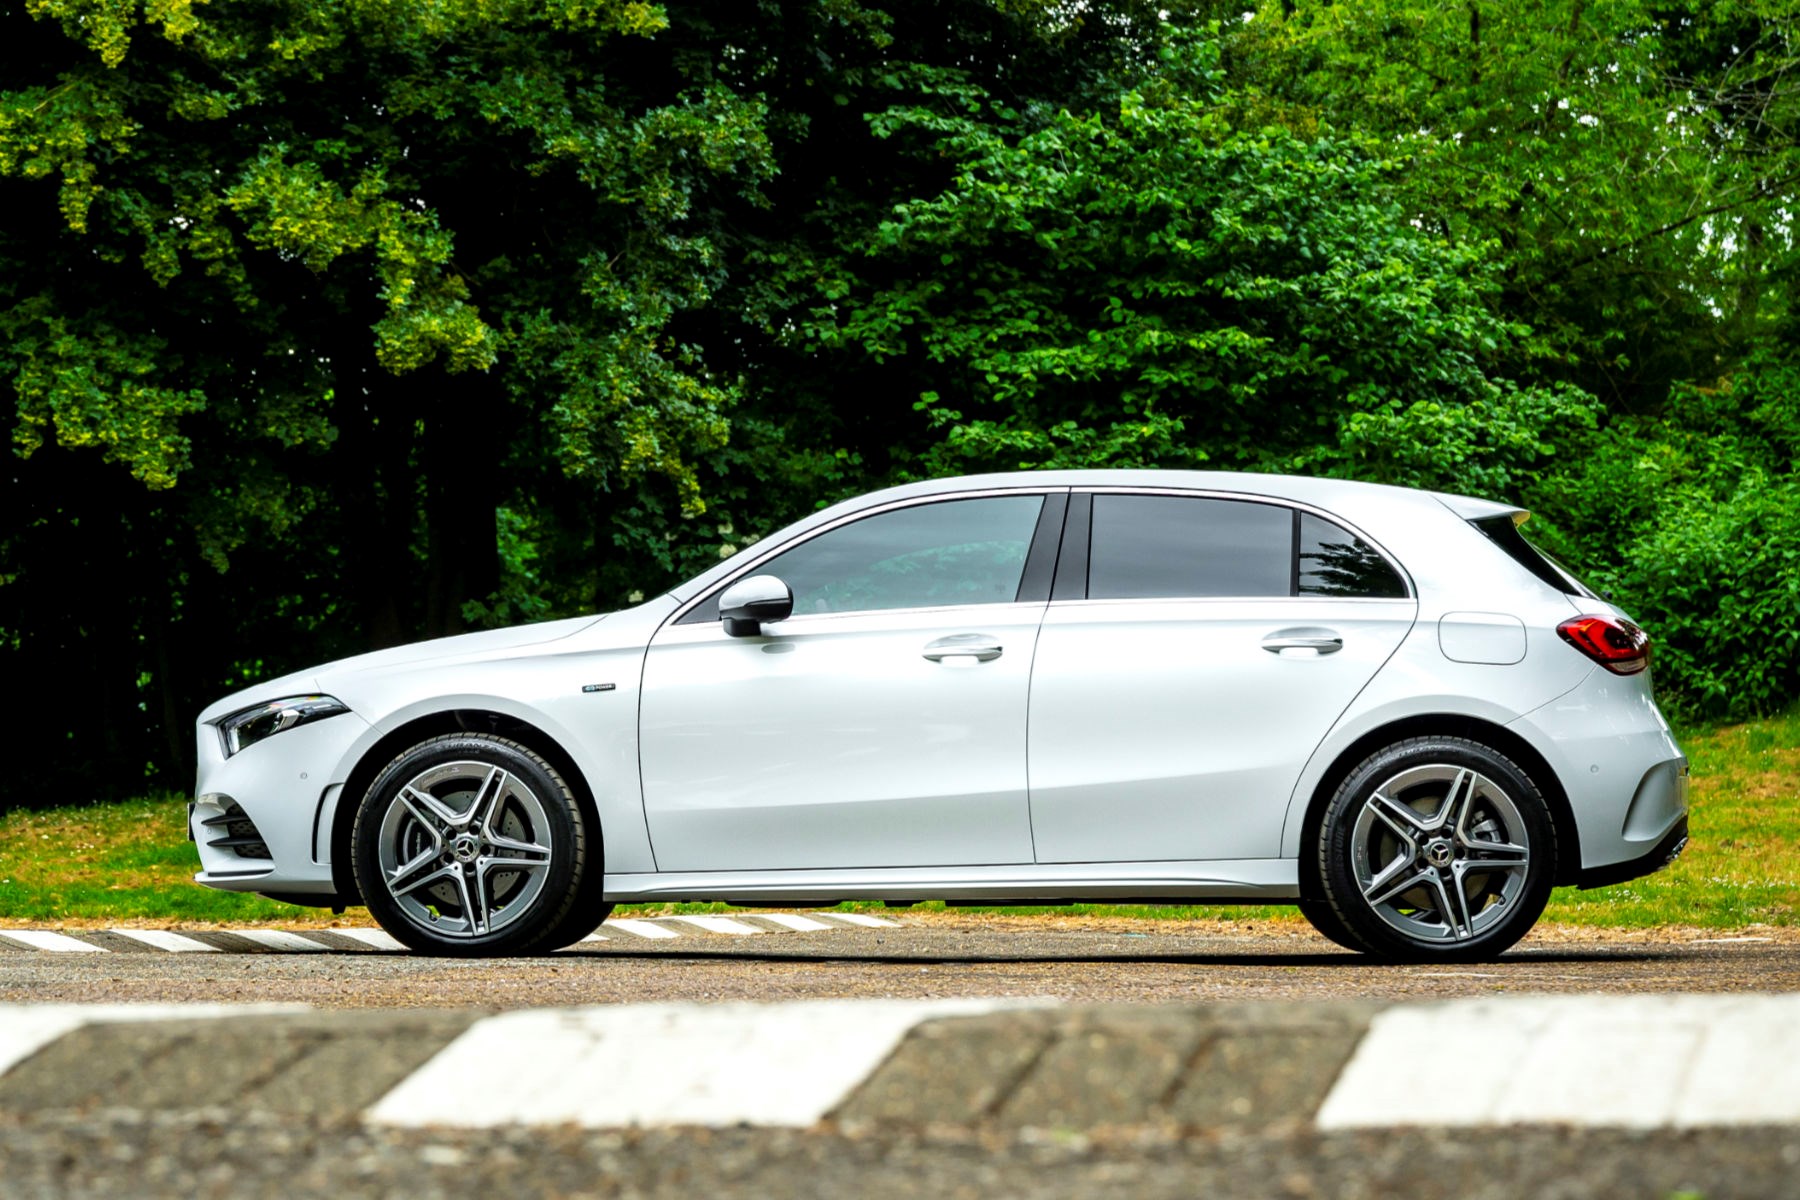 Mercedes A250e  Still getting 79km electric range after 2,5 years